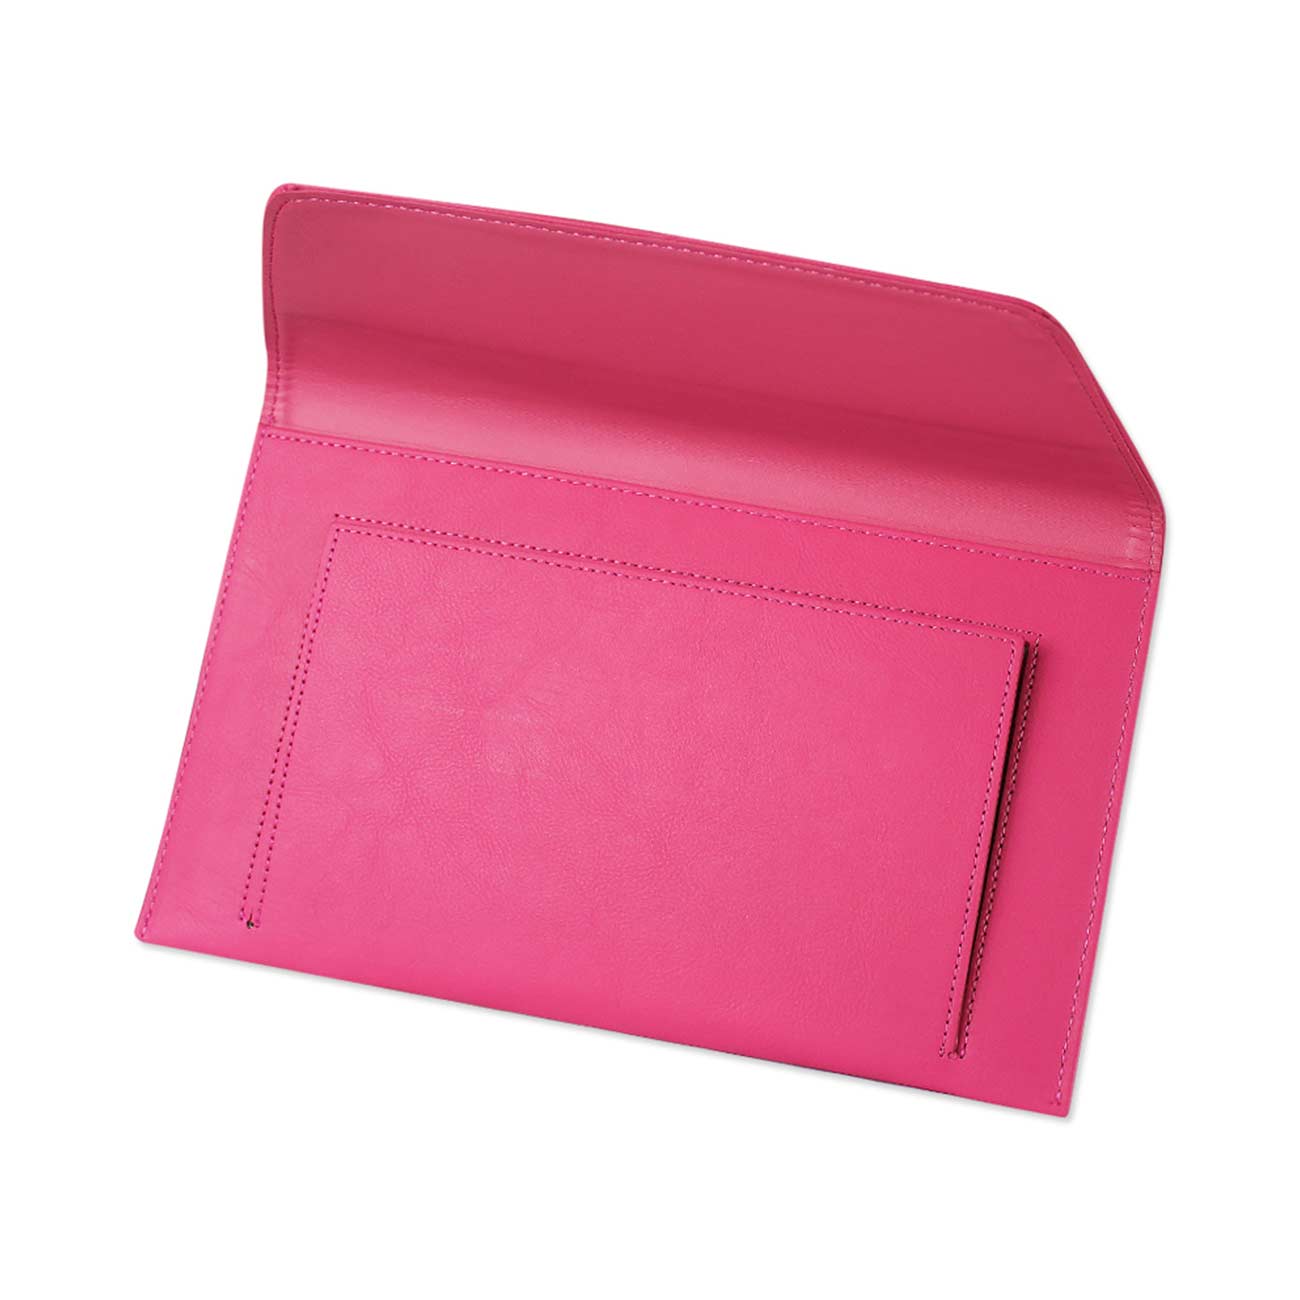 REIKO PREMIUM LEATHER CASE POUCH FOR 11.6INCHES IPADS AND TABLETS In HOT PINK